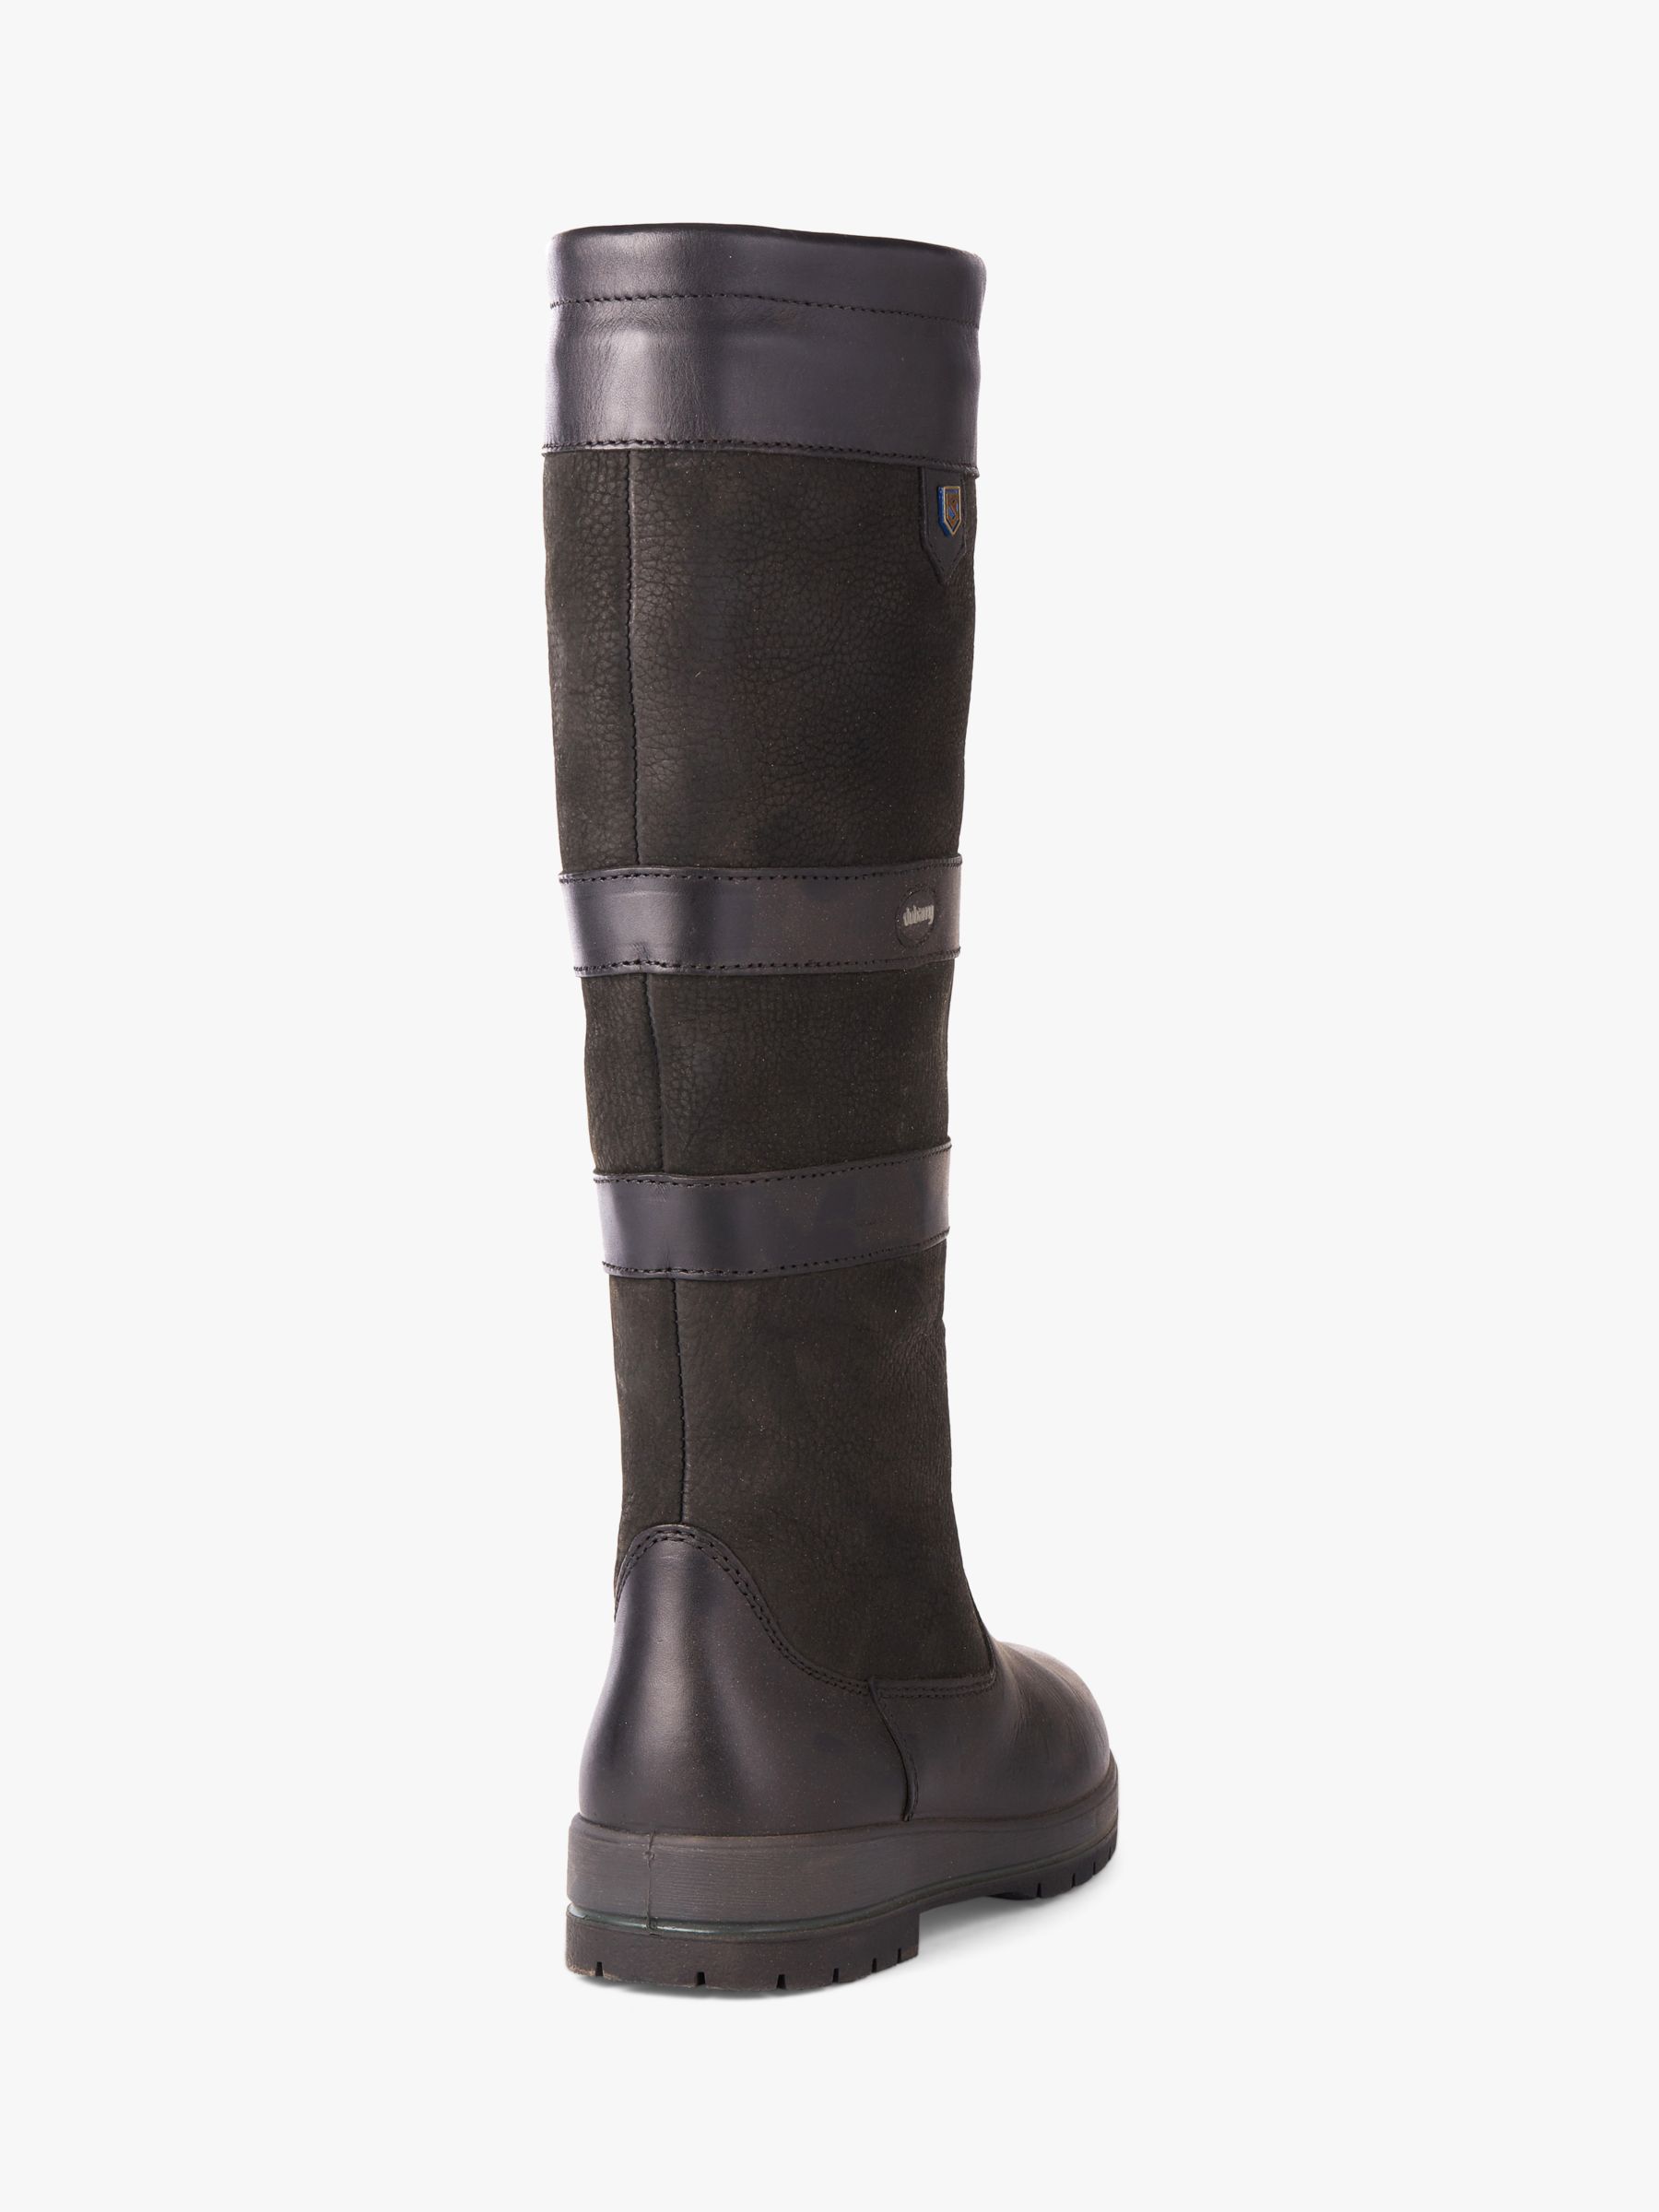 Dubarry Galway Leather Knee Boots, Black, 4